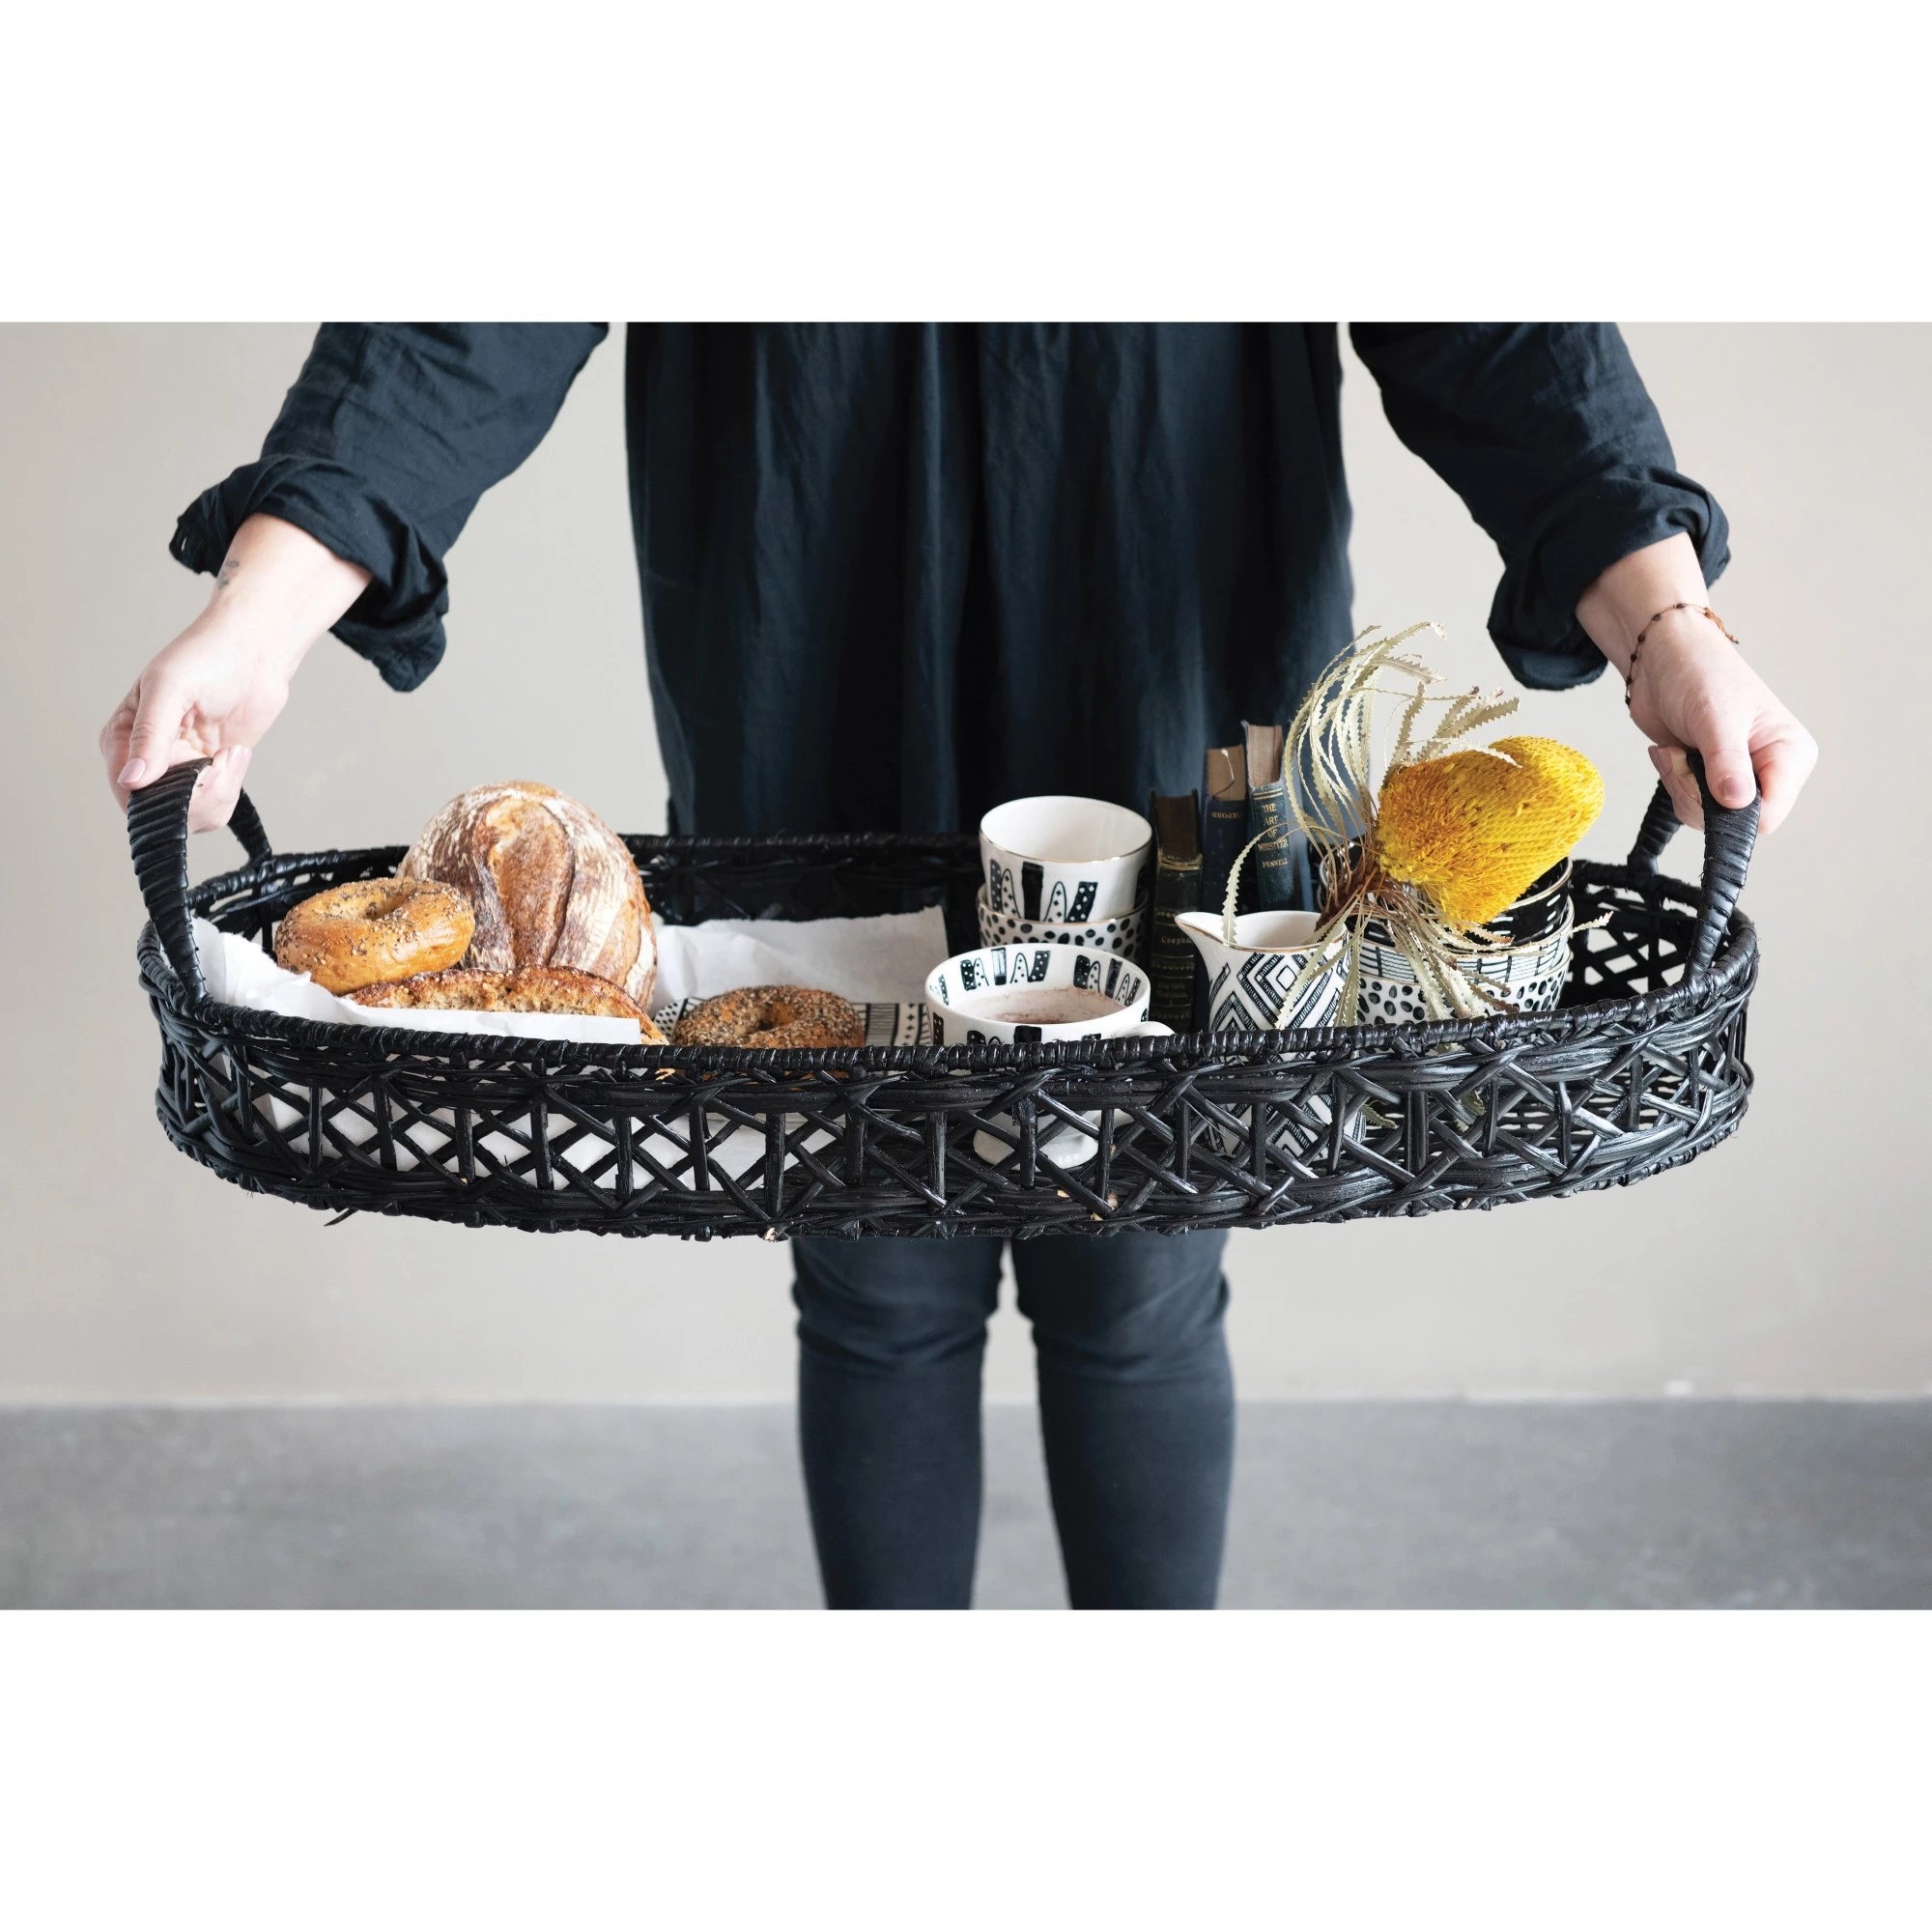 Decorative Hand-Woven Rattan Tray with Handles, Black - Image 1